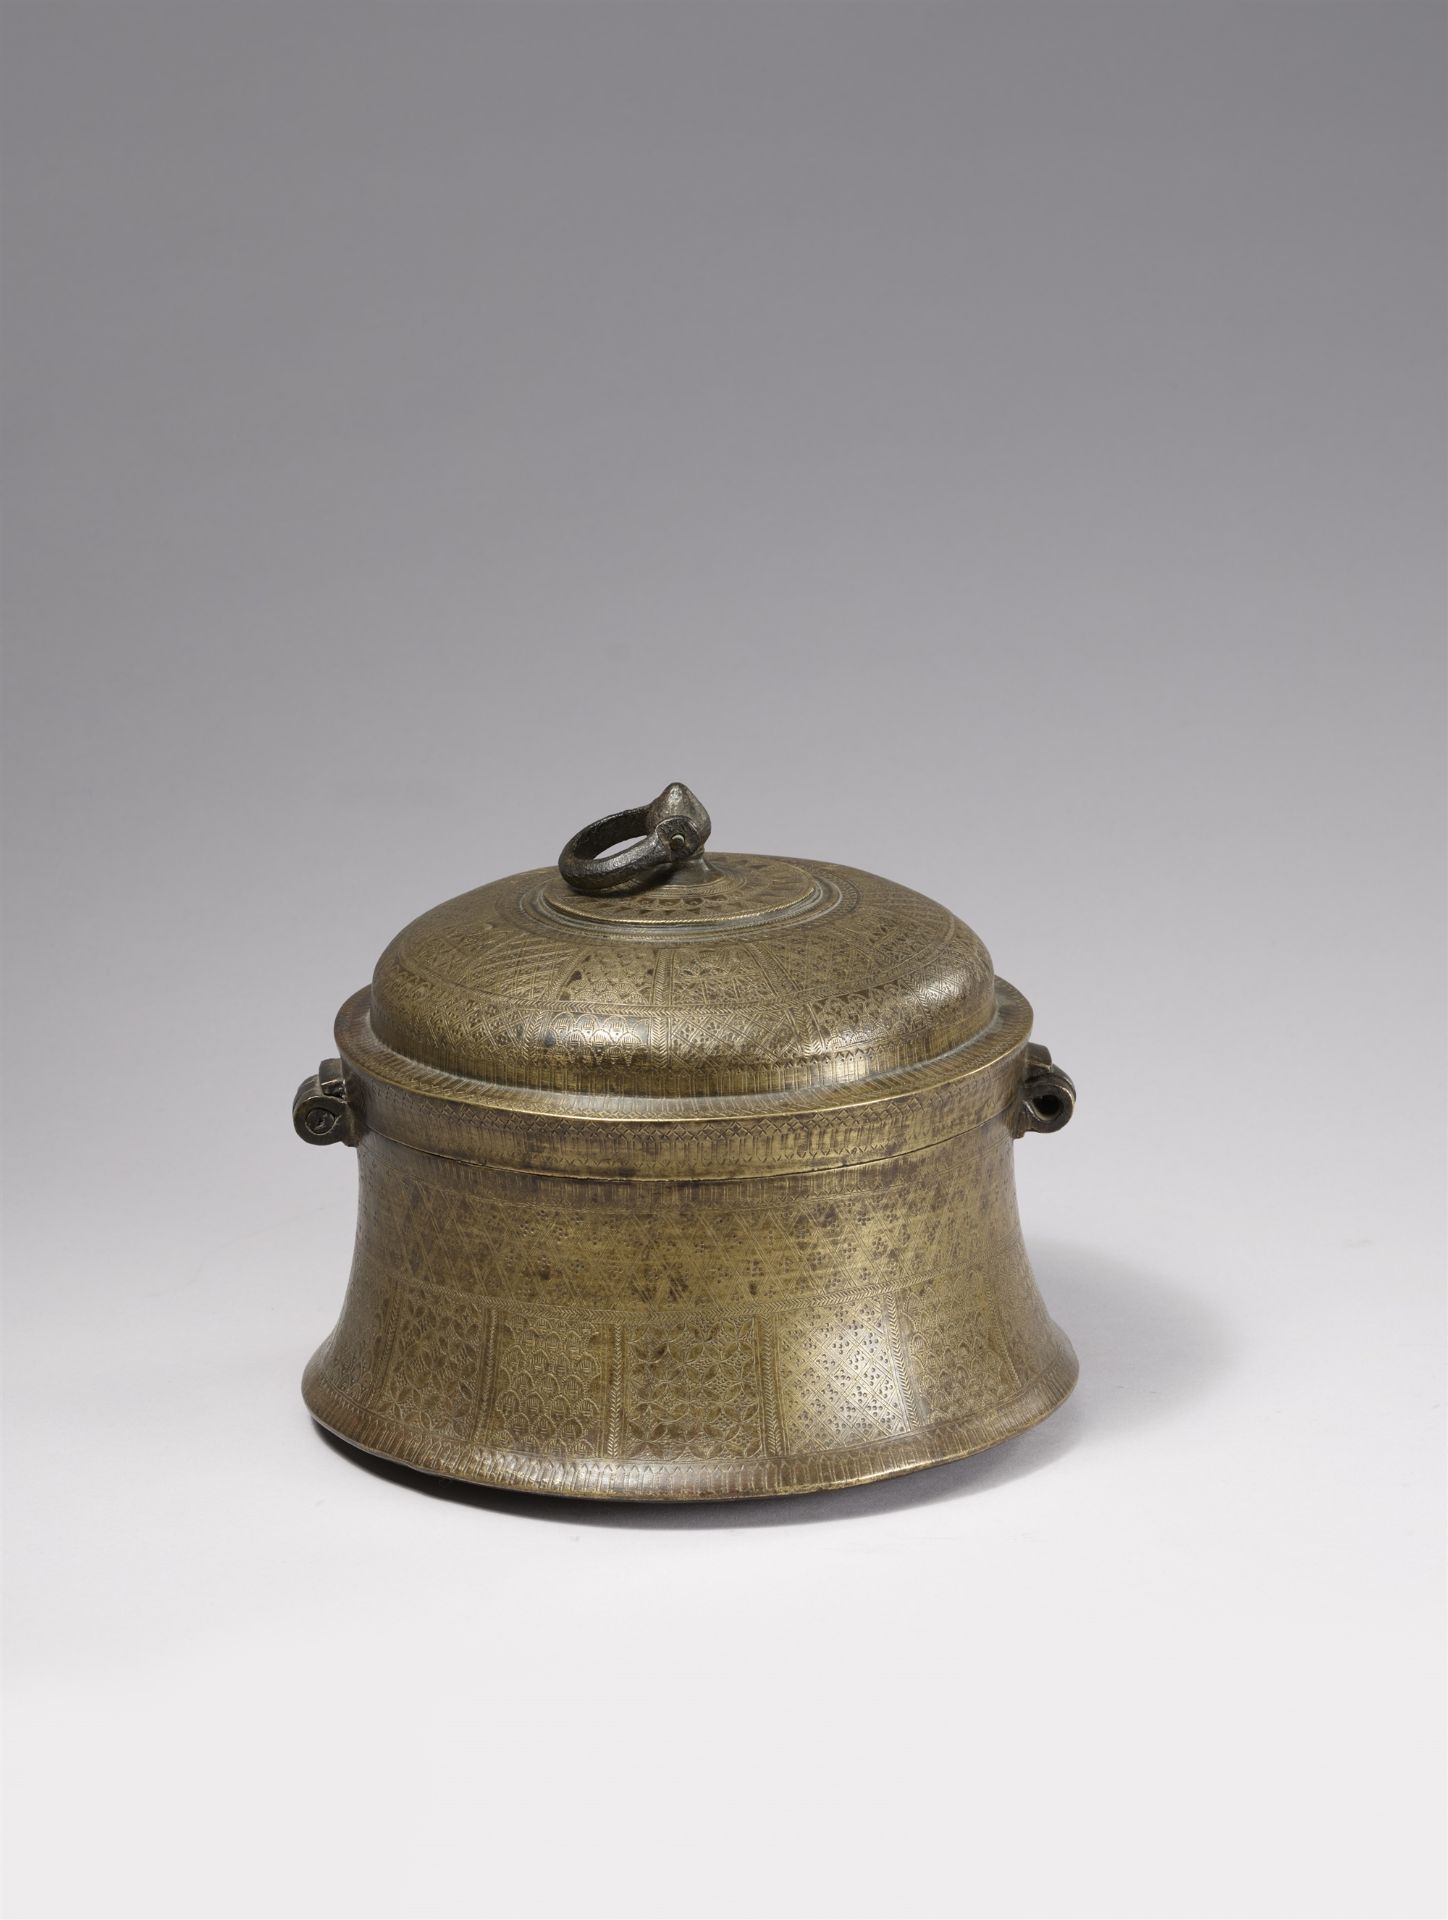 A Rajasthani bronze betel and spice box (pandan). Northern India. 18th/early 19th century - Image 3 of 5